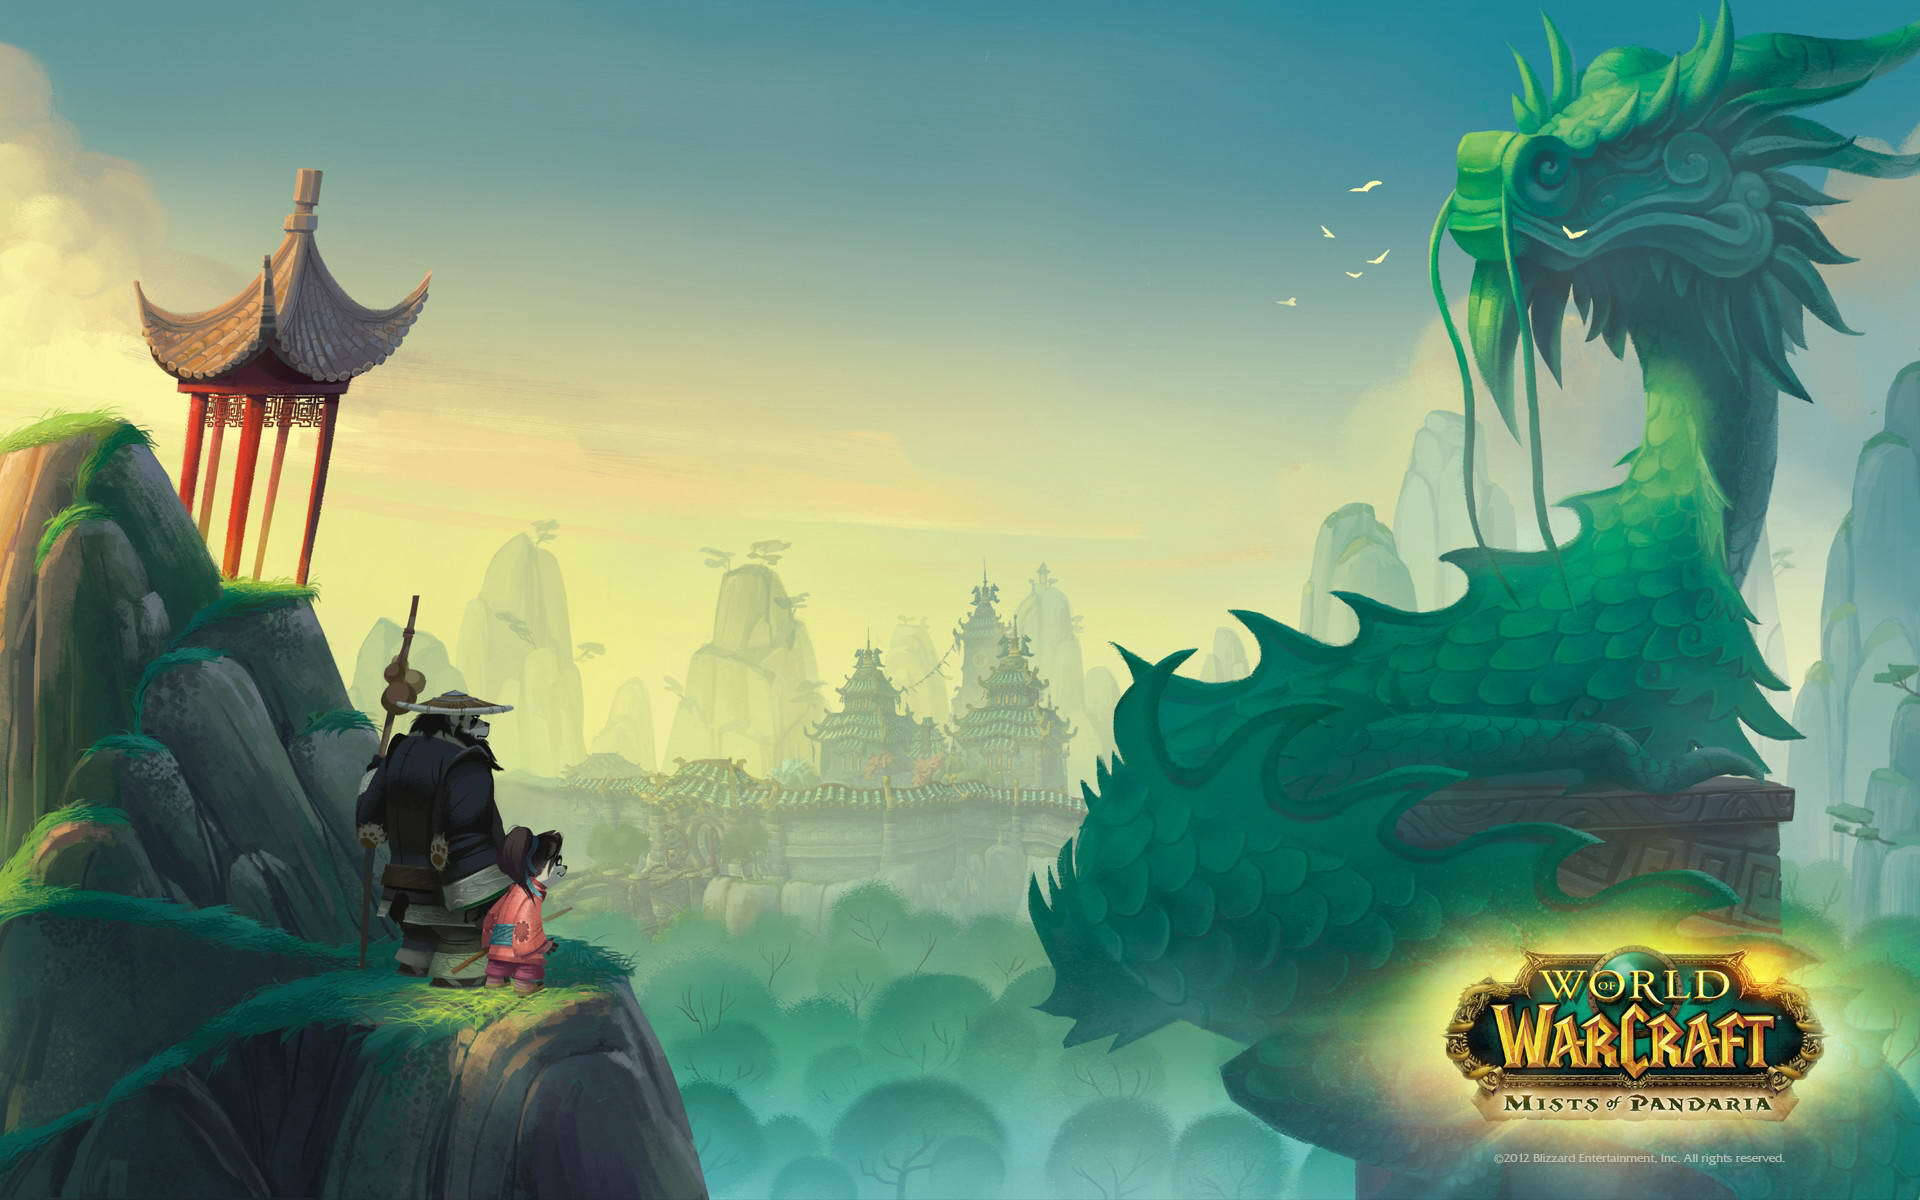 Welcome to Mists of Pandaria - the Ancient Realm Wallpaper